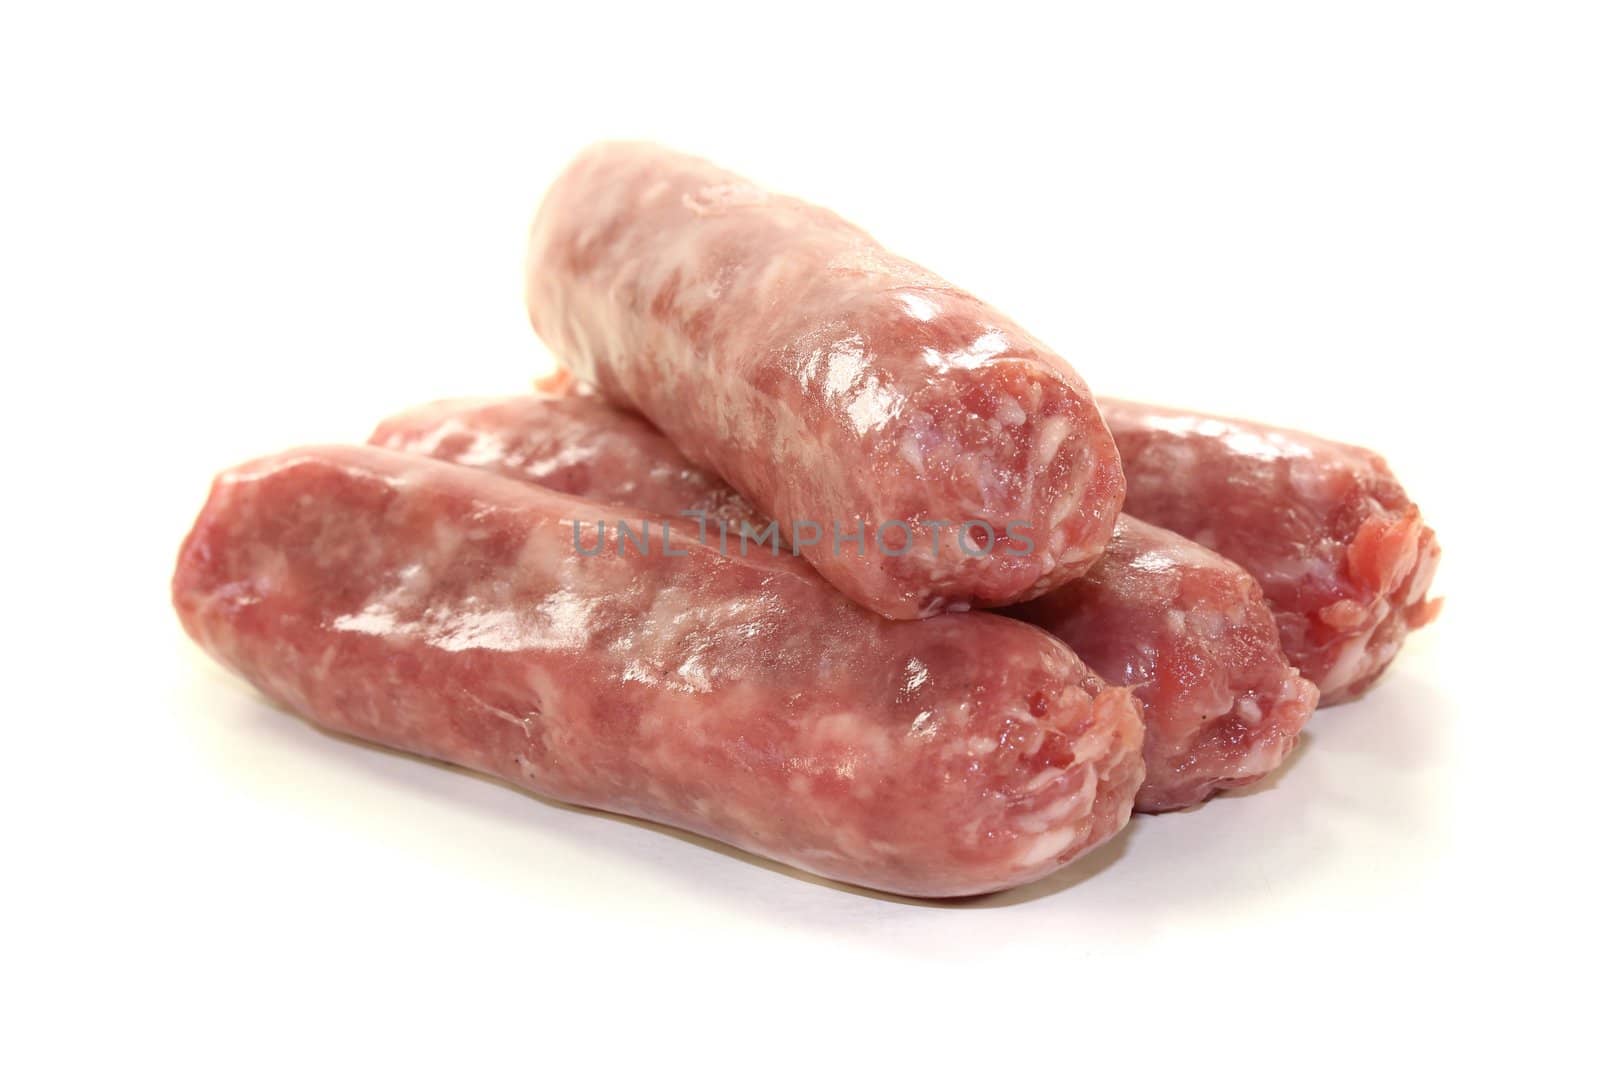 Salsiccia on a stack on bright background